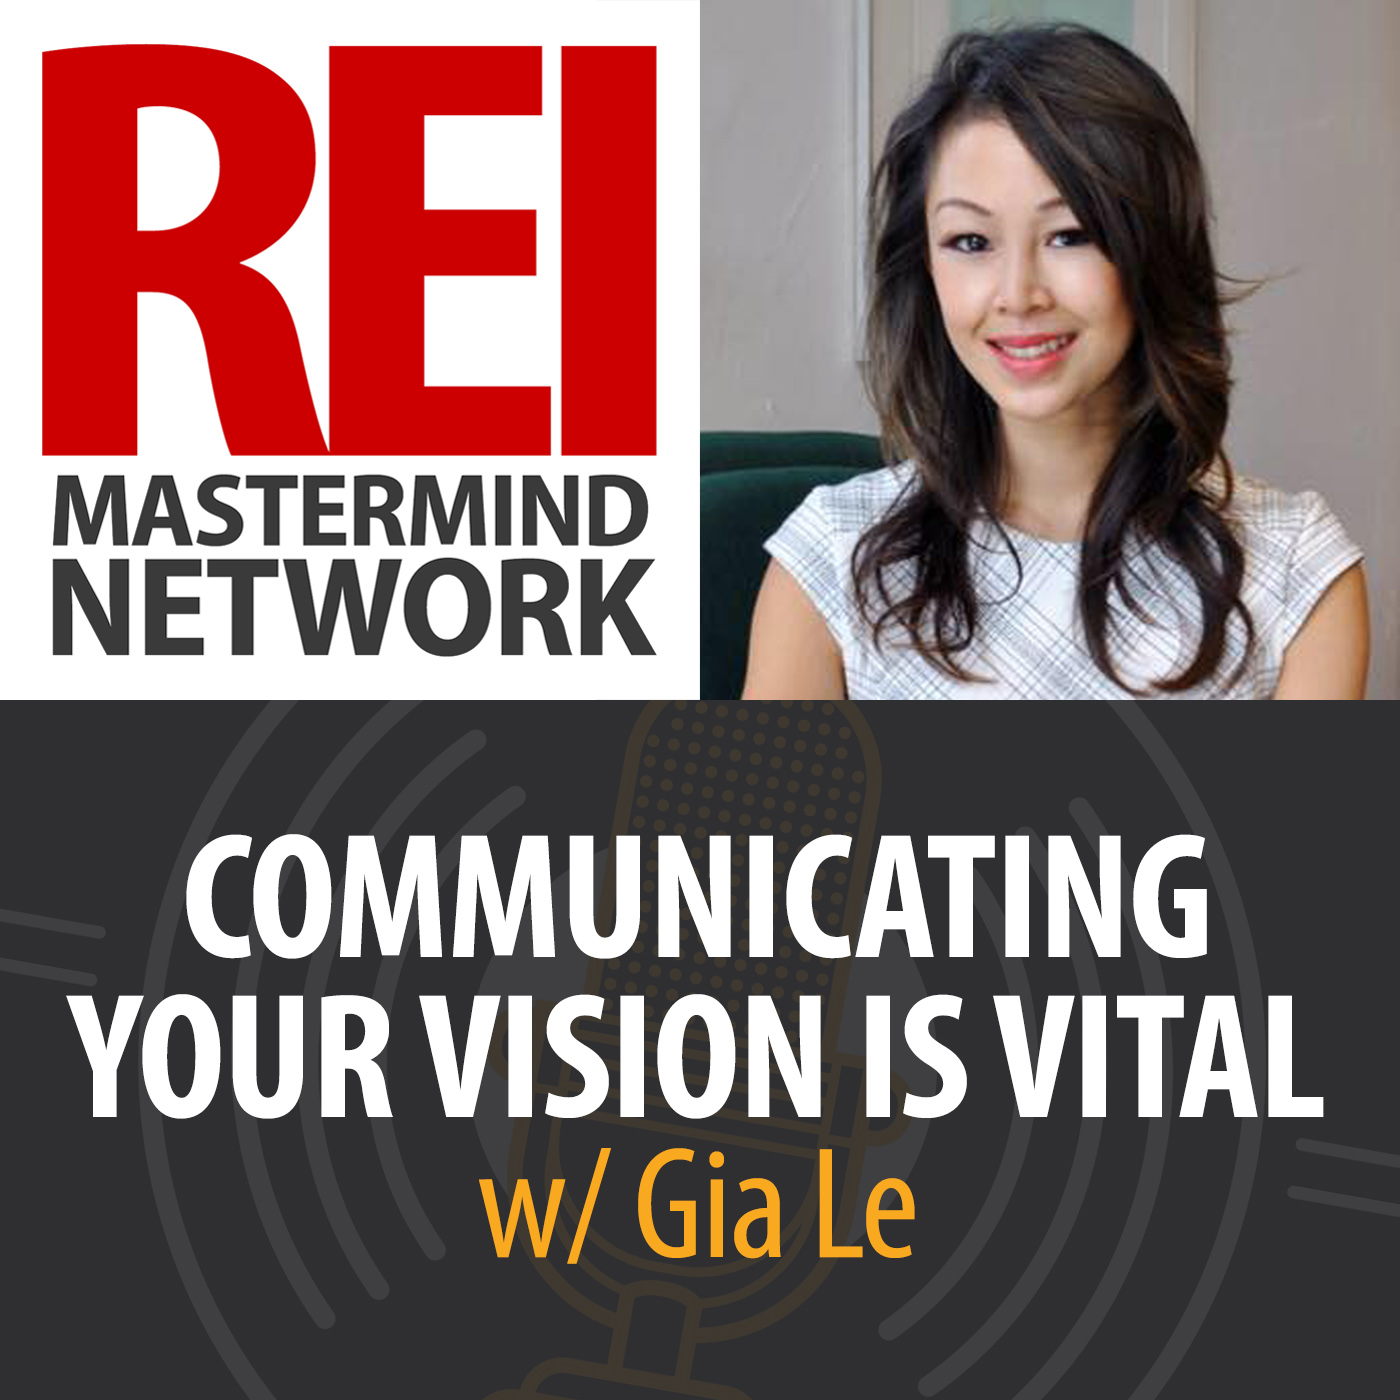 Communicating Your Vision is Vital with Gia Le